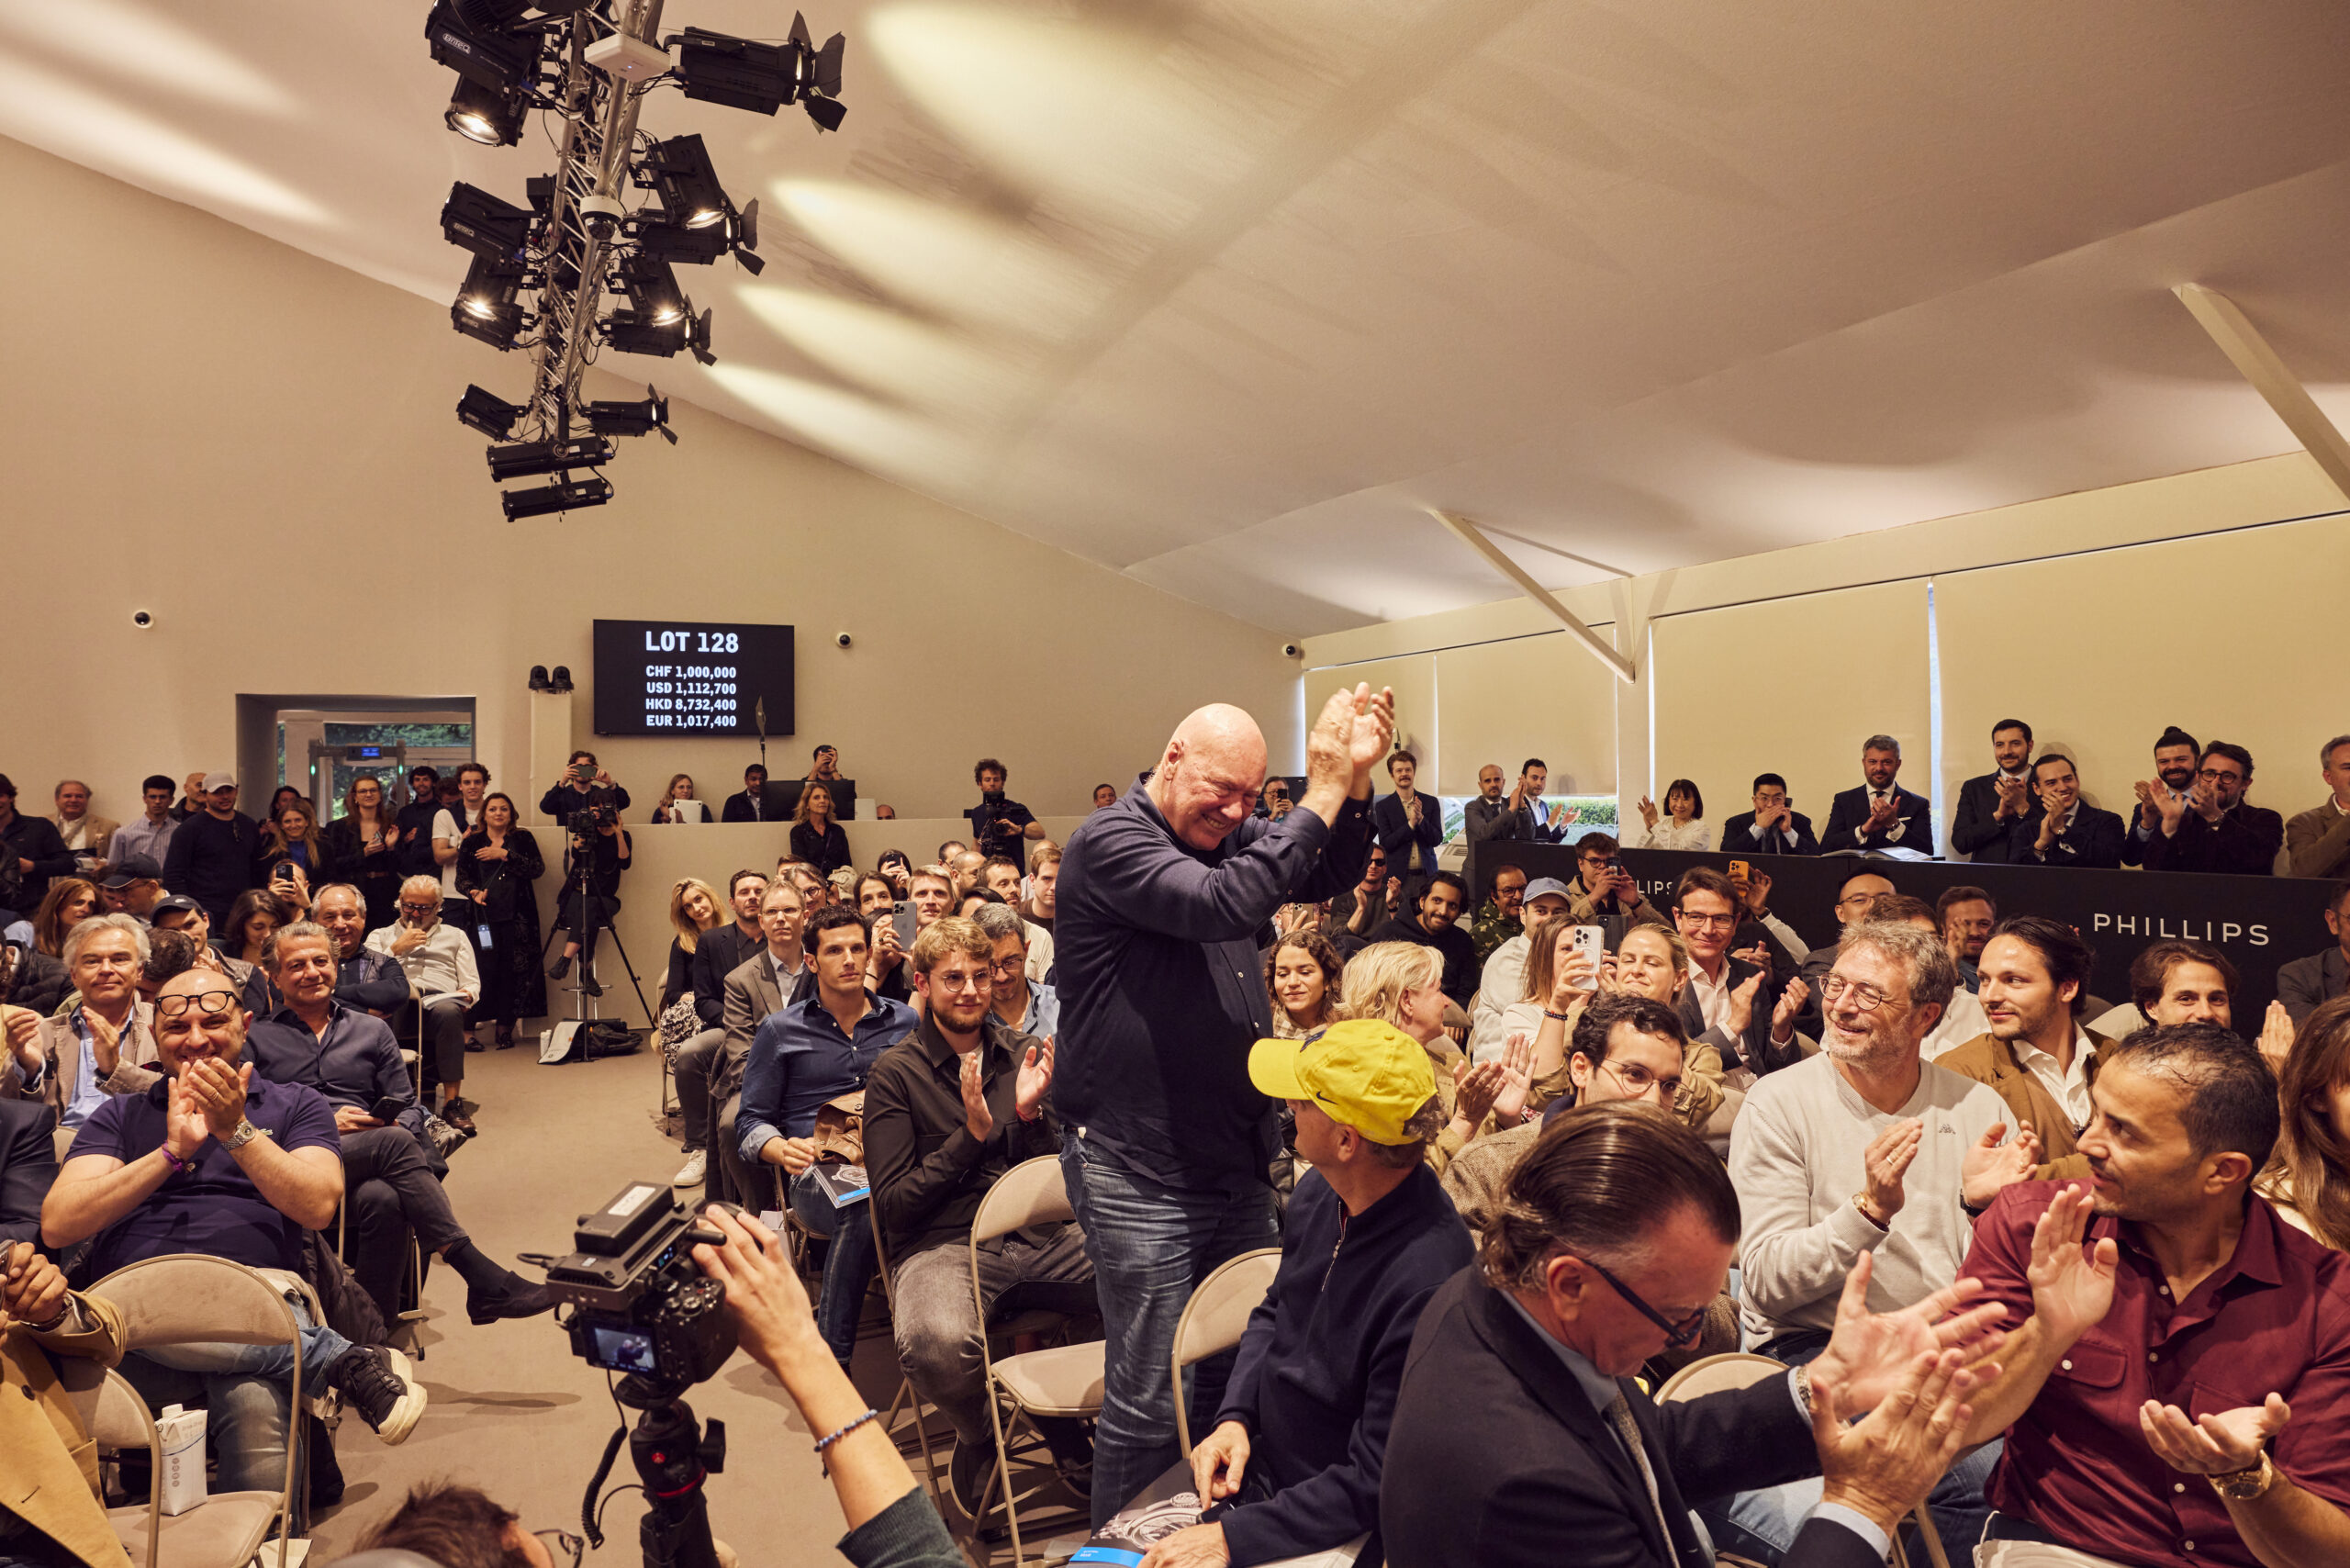 Jean-Claude Biver unveils his watchmaking house: Biver